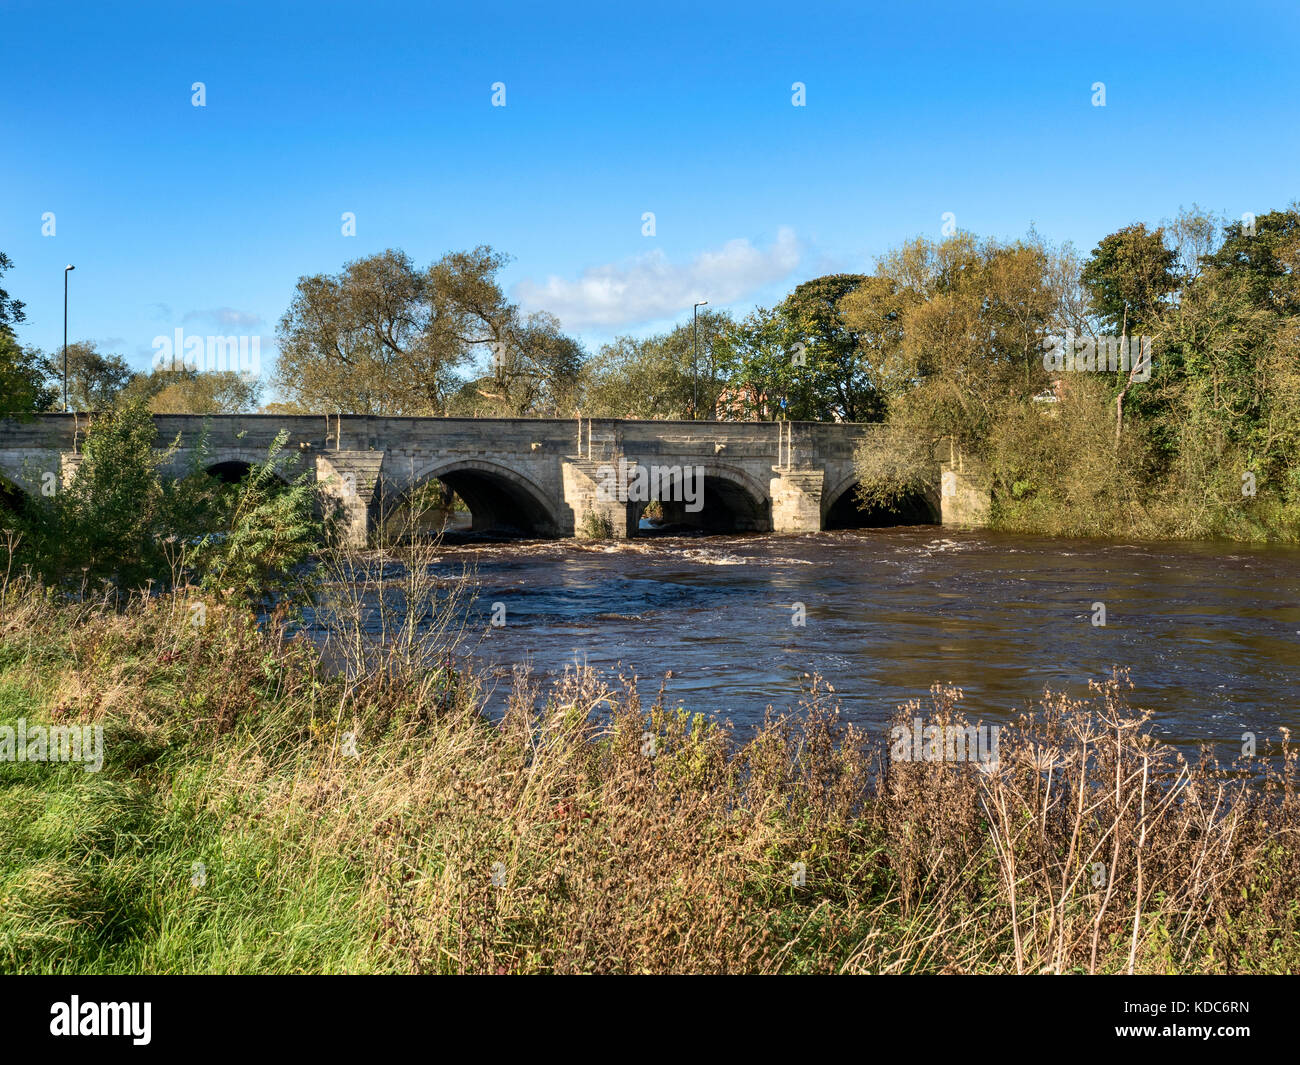 North Bridge a mediaeval bridge dating back to 1309 over the River Ure at Ripon Yorkshire England Stock Photo